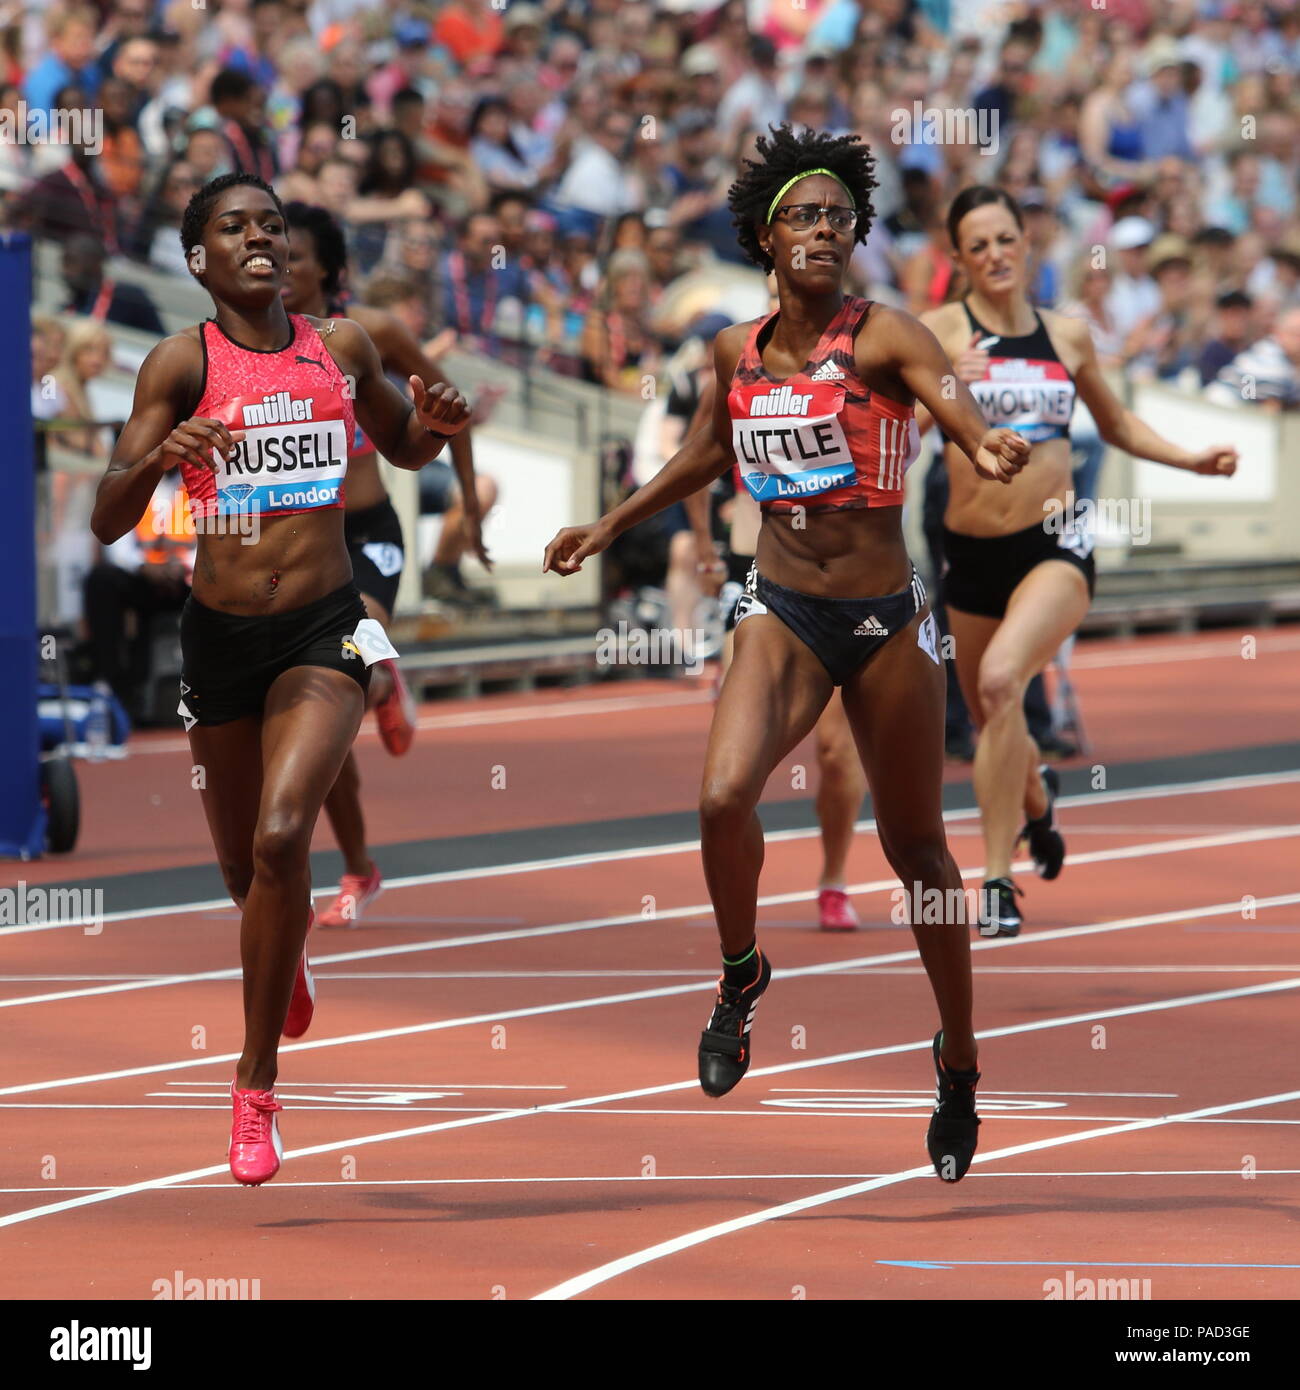 London, UK. 21st July, 2018. Shamier LITTLE (USA) & Janeive RUSSELL (JAM) taking first and second in the Women's 400m Hurdles at the IAAF Diamond League, Muller Anniversary Games, Queen Elizabeth Olympic, LONDON, UK 21 July 2018 Credit: Grant Burton/Alamy Live News Stock Photo